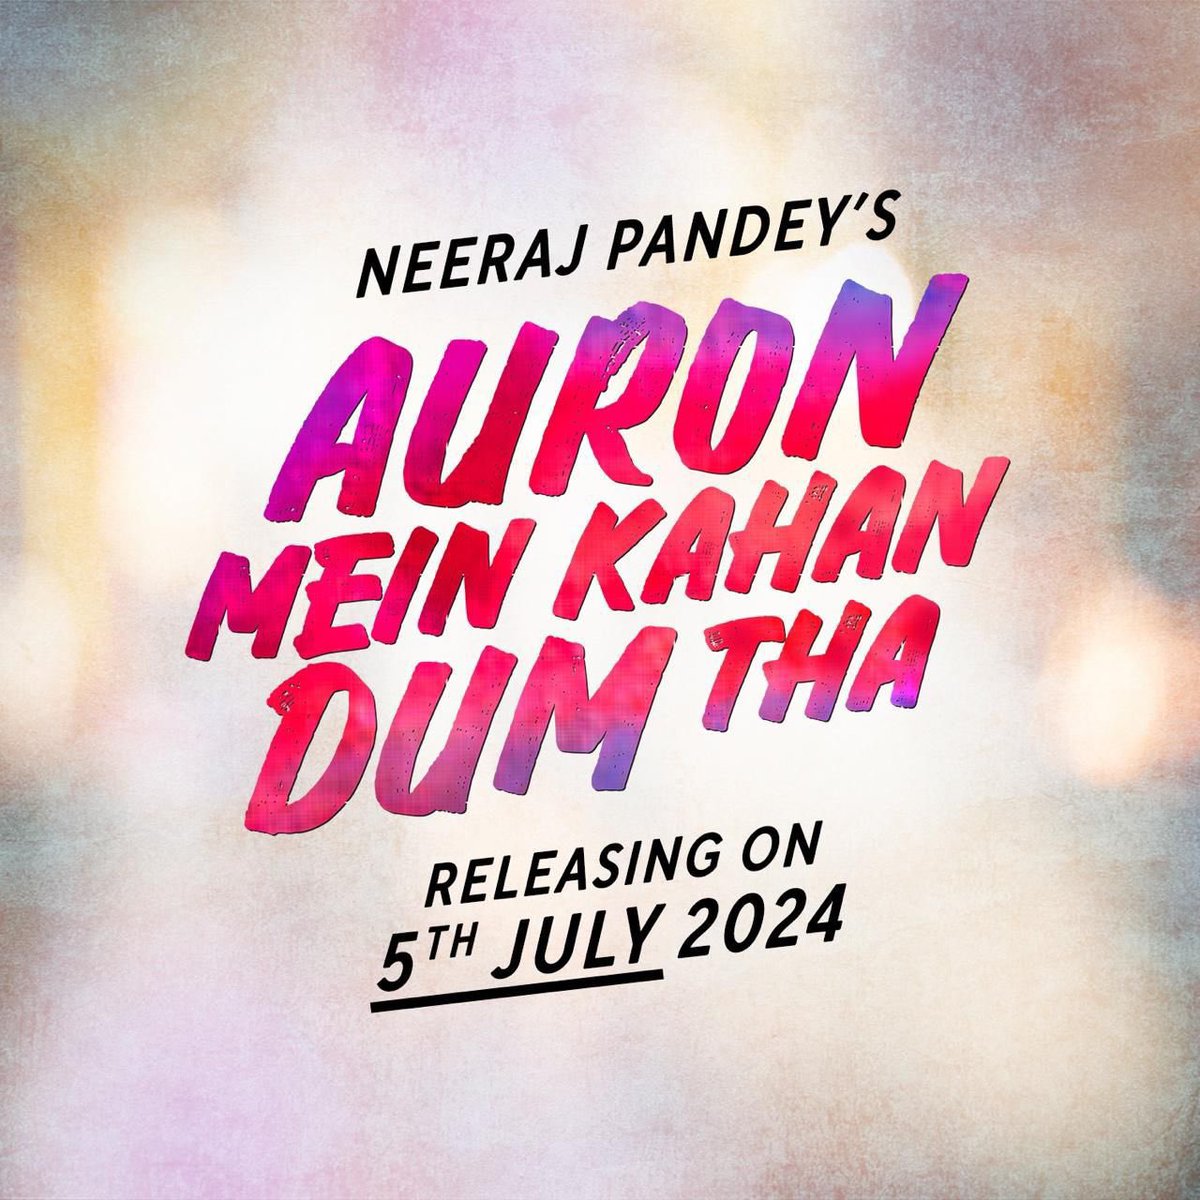 #AuronMeinKahanDumTha to now release on 4th July 2024 ! Ajay Devgn, Tabu and Neeraj Pandey🤌🏻 This is looking like a sure shot SUPER HIT ! @ajaydevgn